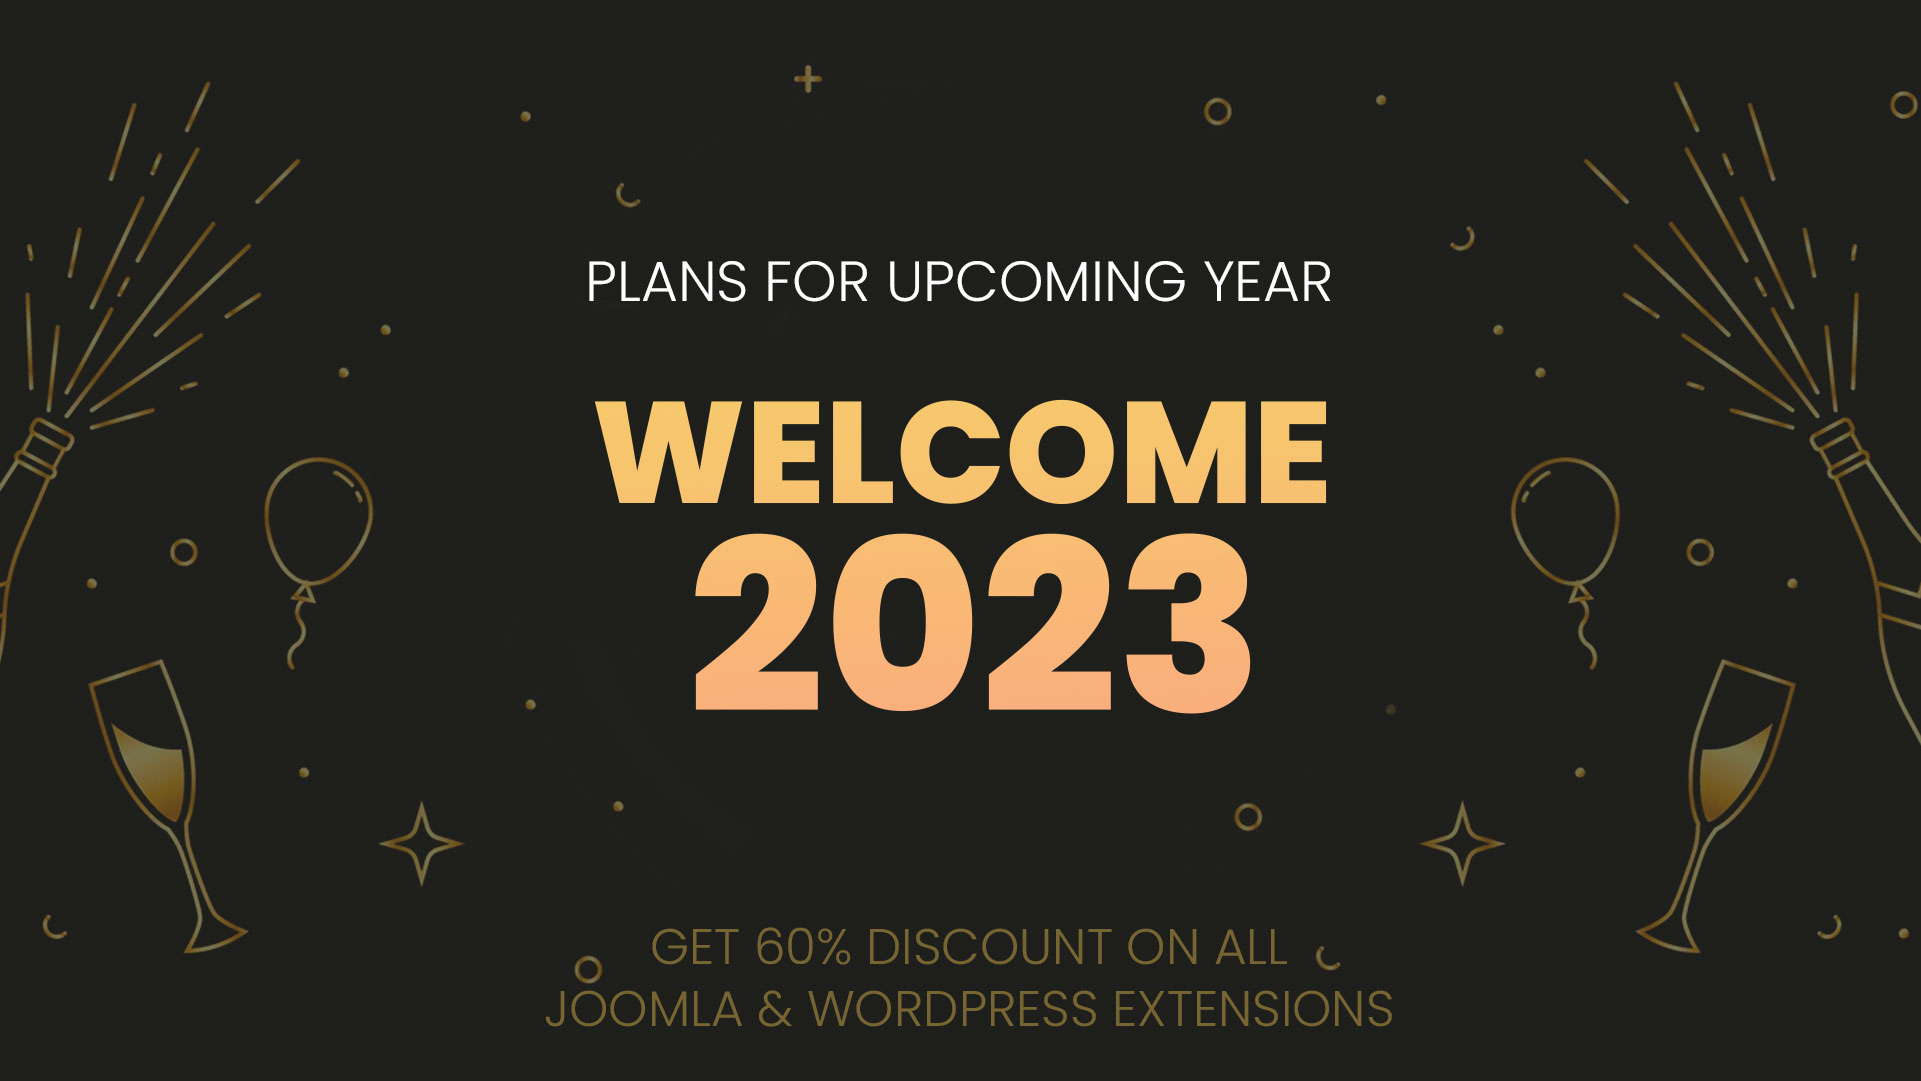 welcome-2023-plans